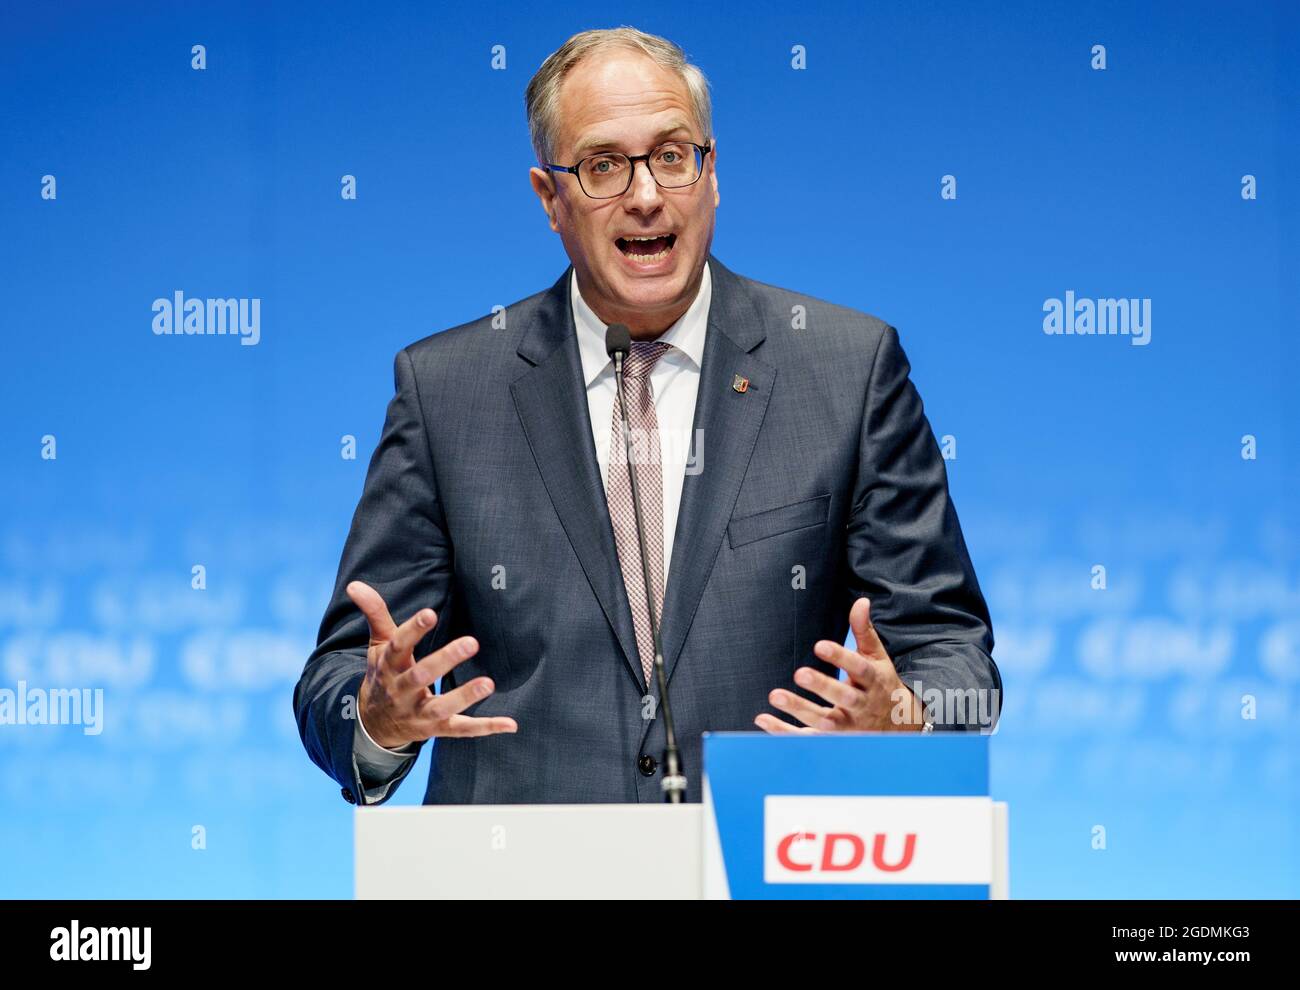 Tobias Koch High Resolution Stock Photography and Images - Alamy